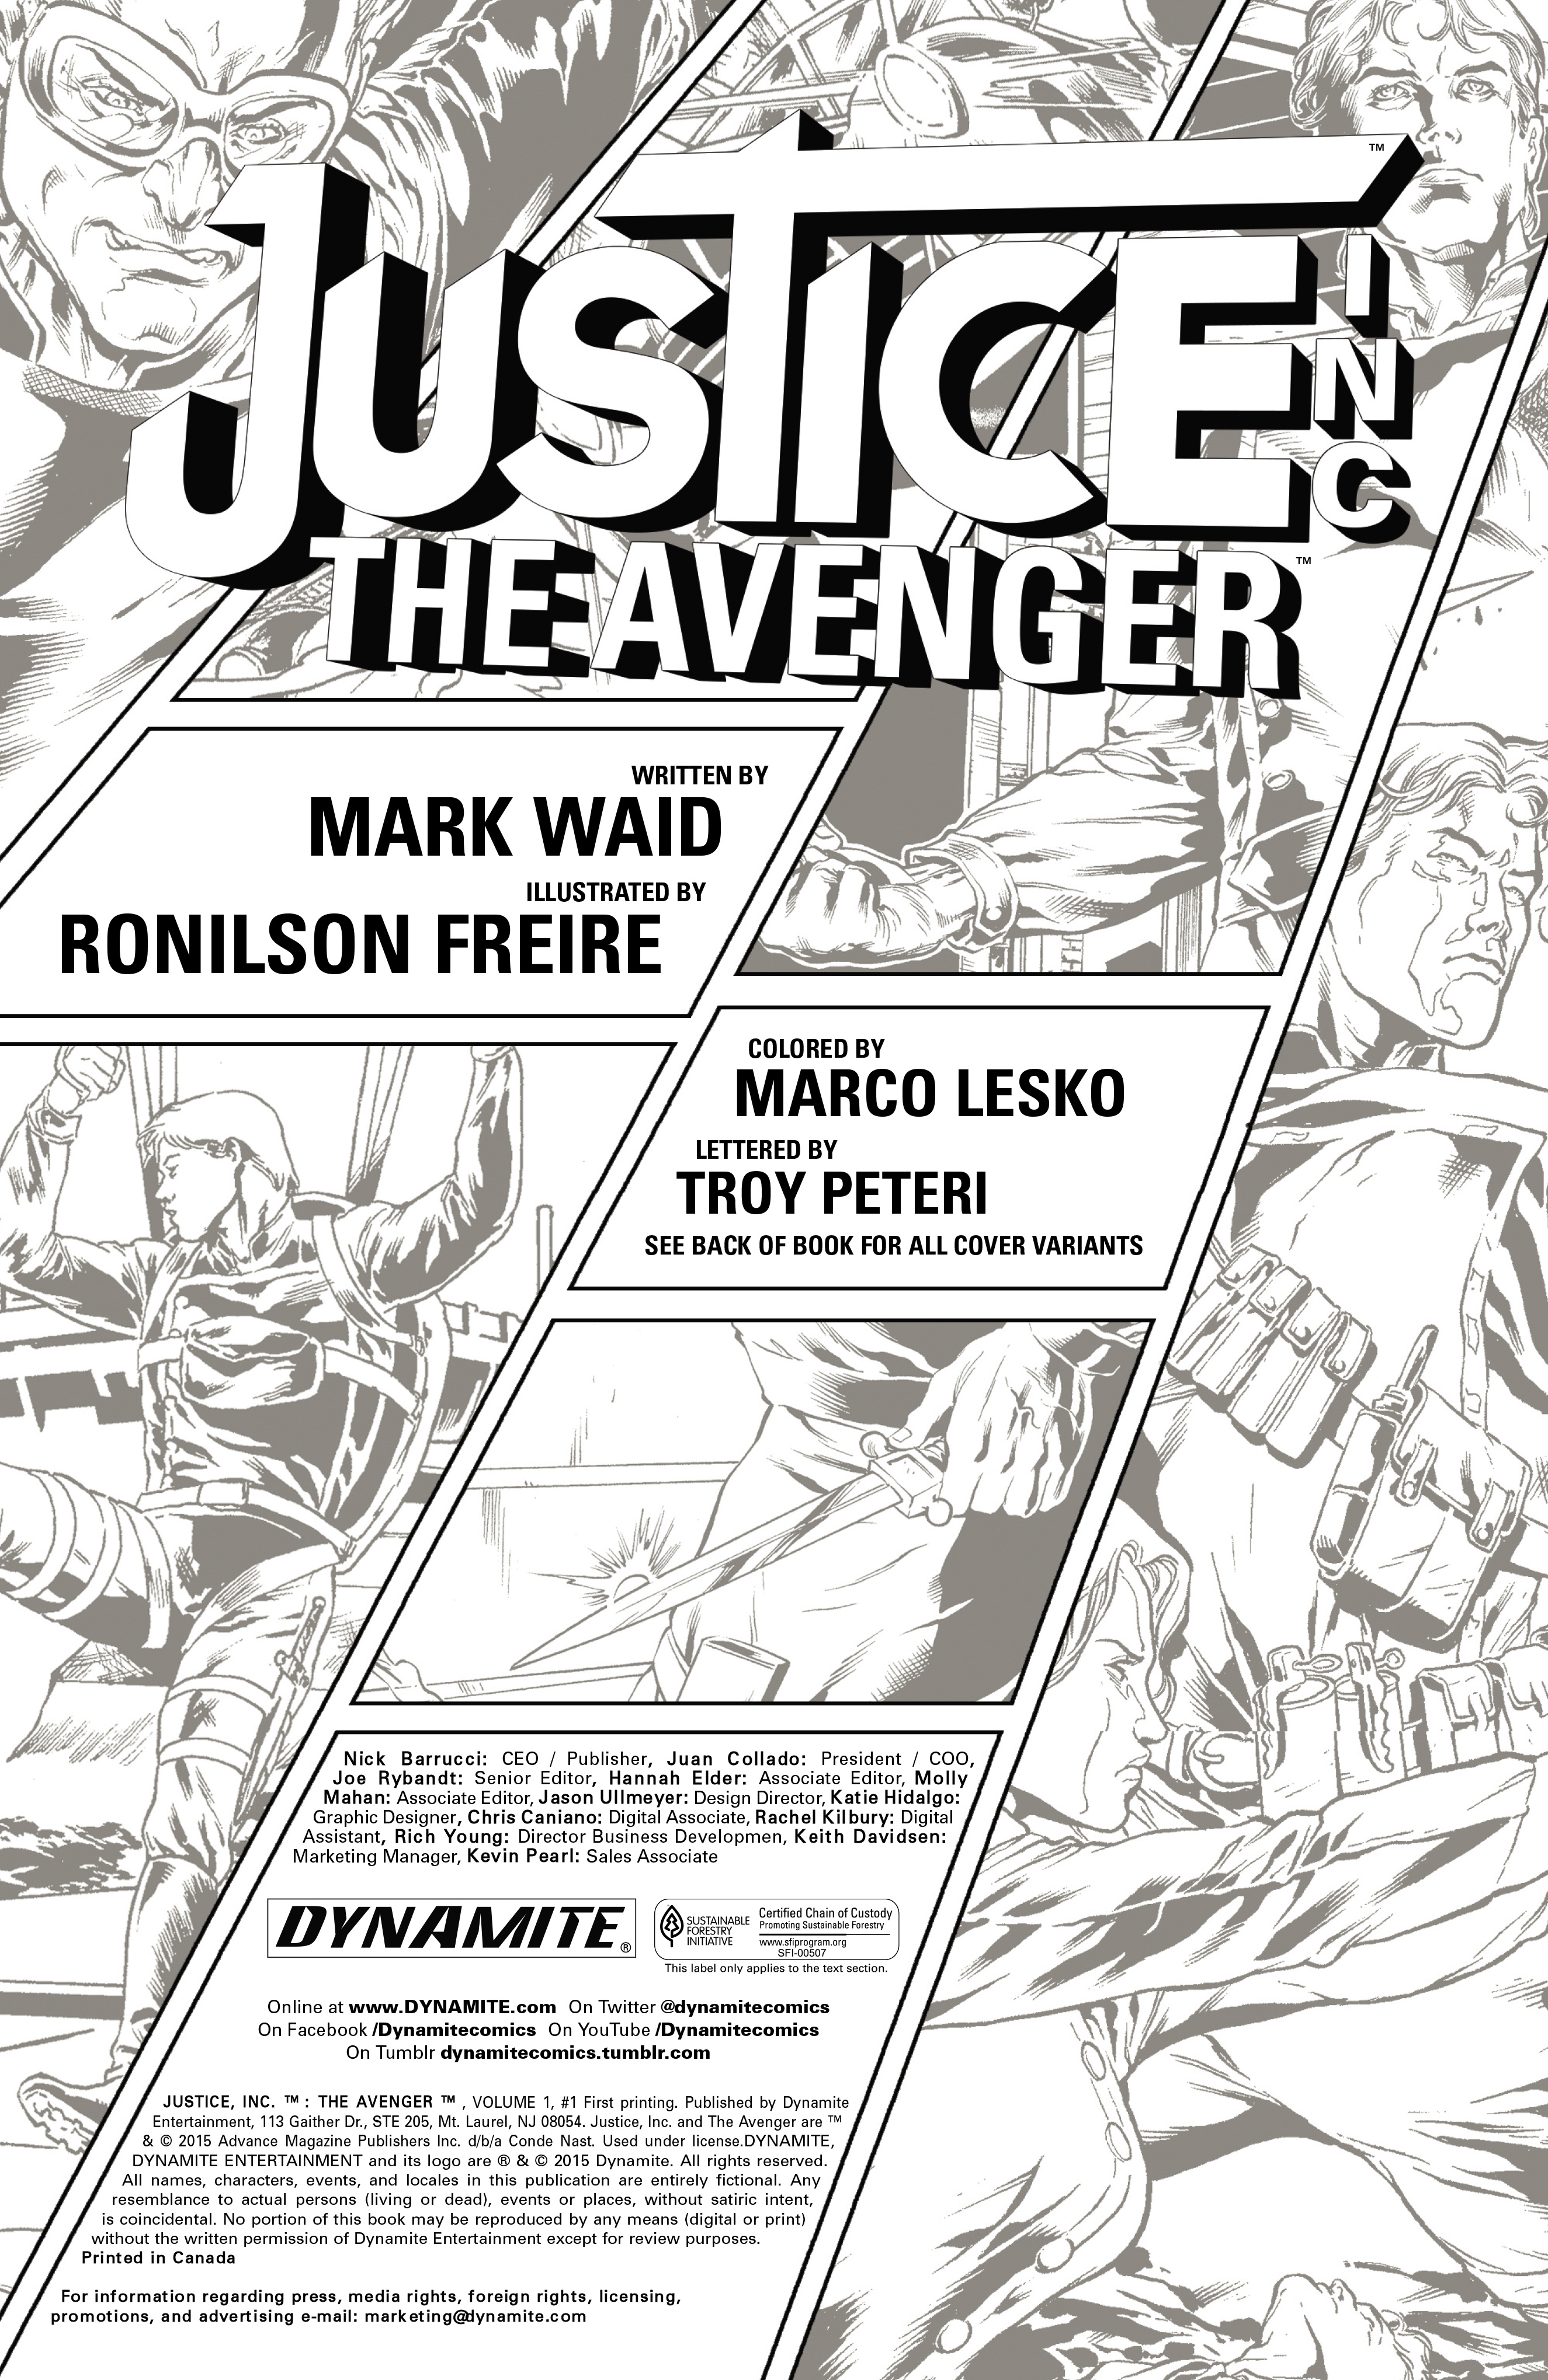 Read online Justice Inc.: The Avenger comic -  Issue #1 - 6